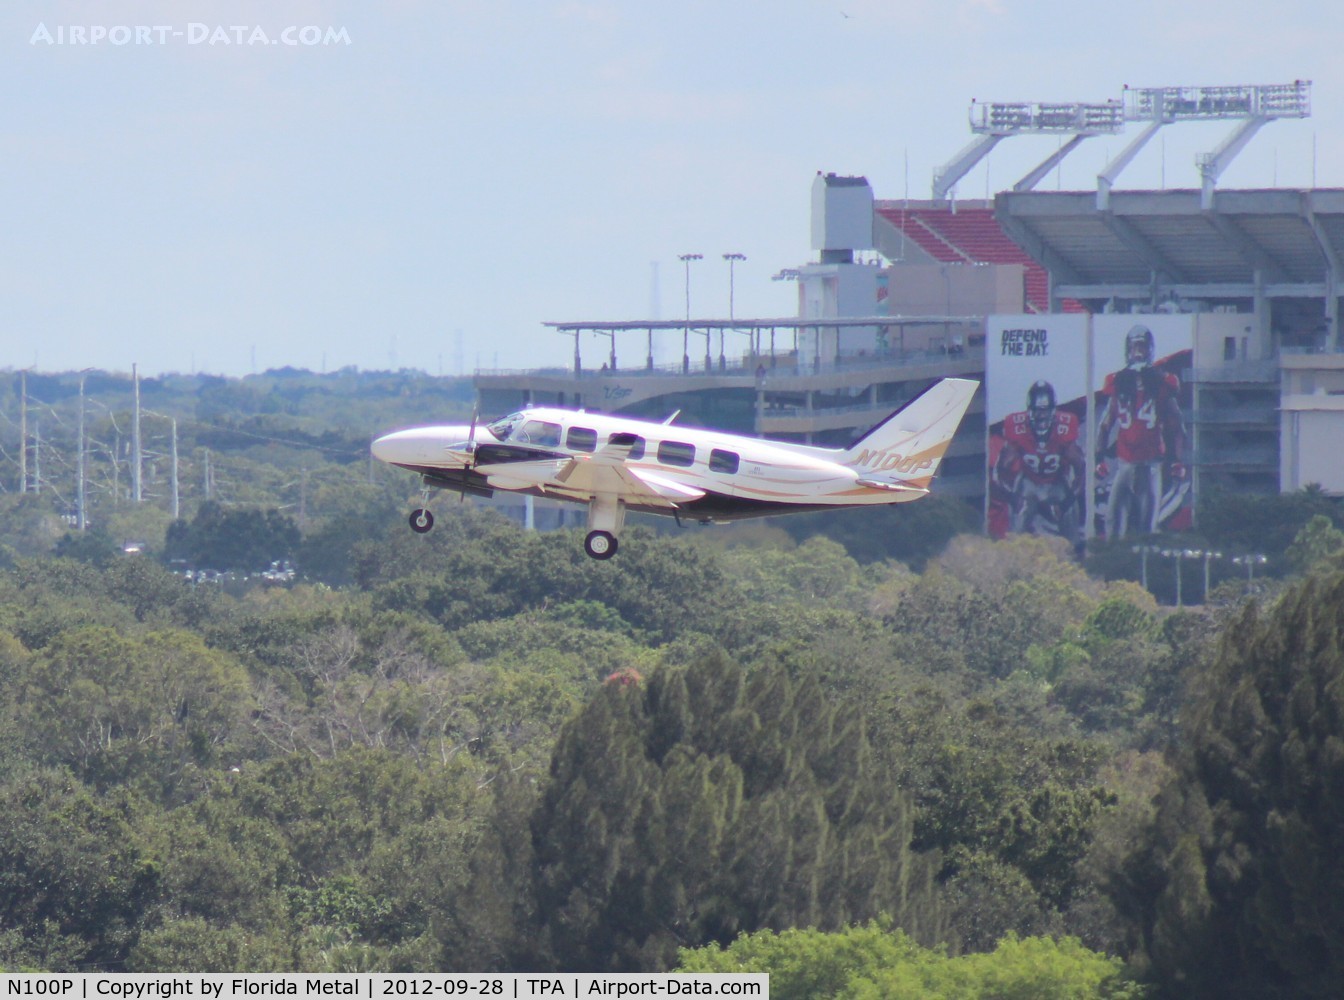 N100P, 1982 Piper PA-31-350 Chieftain C/N 31-8252019, PA-31-350 taking off at Tampa with Raymond James (Tampa Bay Buccaneers NFL team) Stadium in background